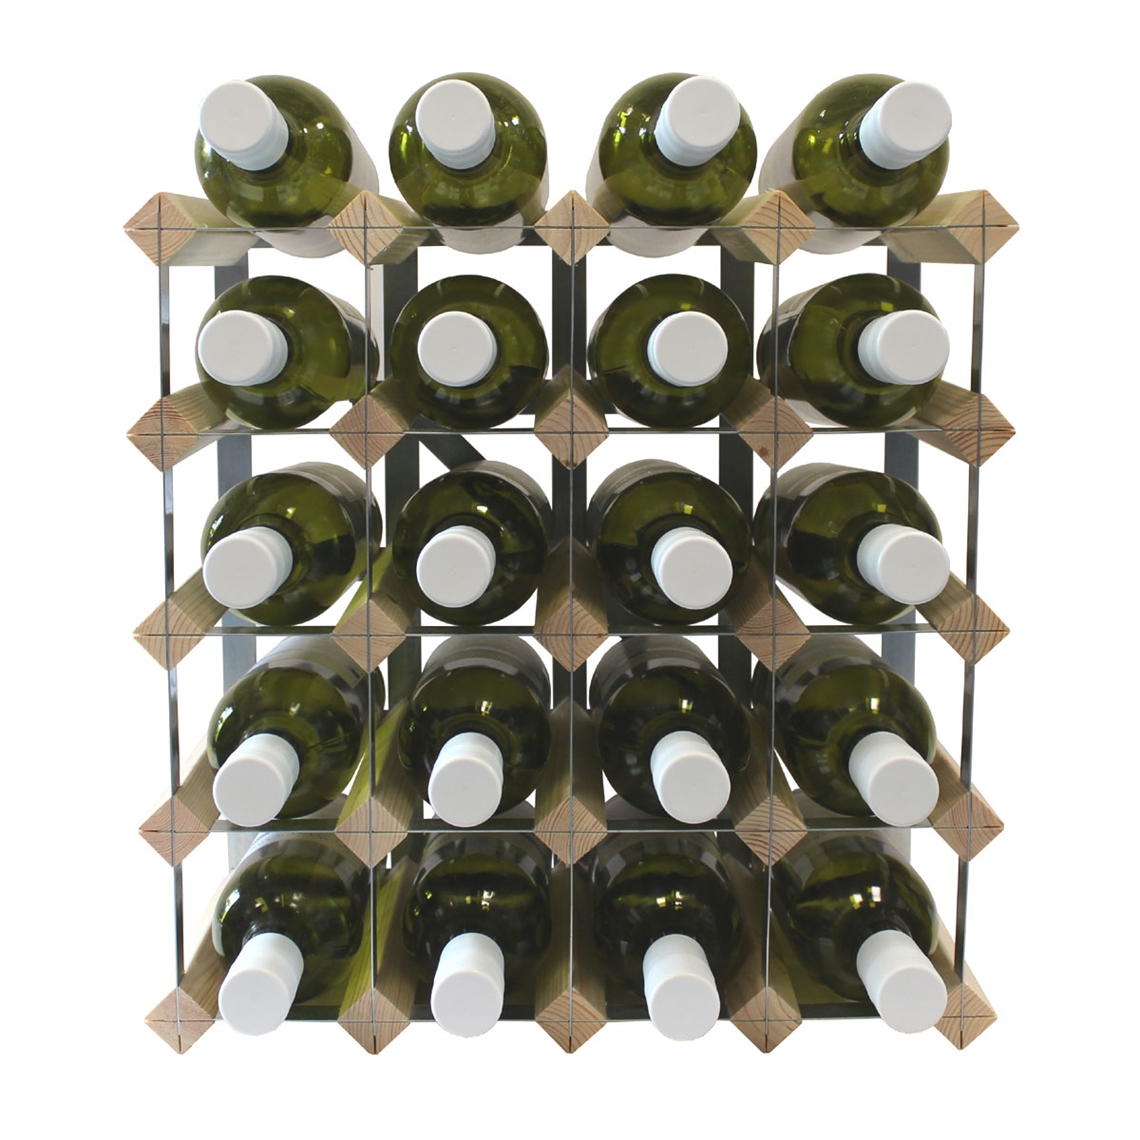 View more assembled wine racks from our Assembled Wine Racks range